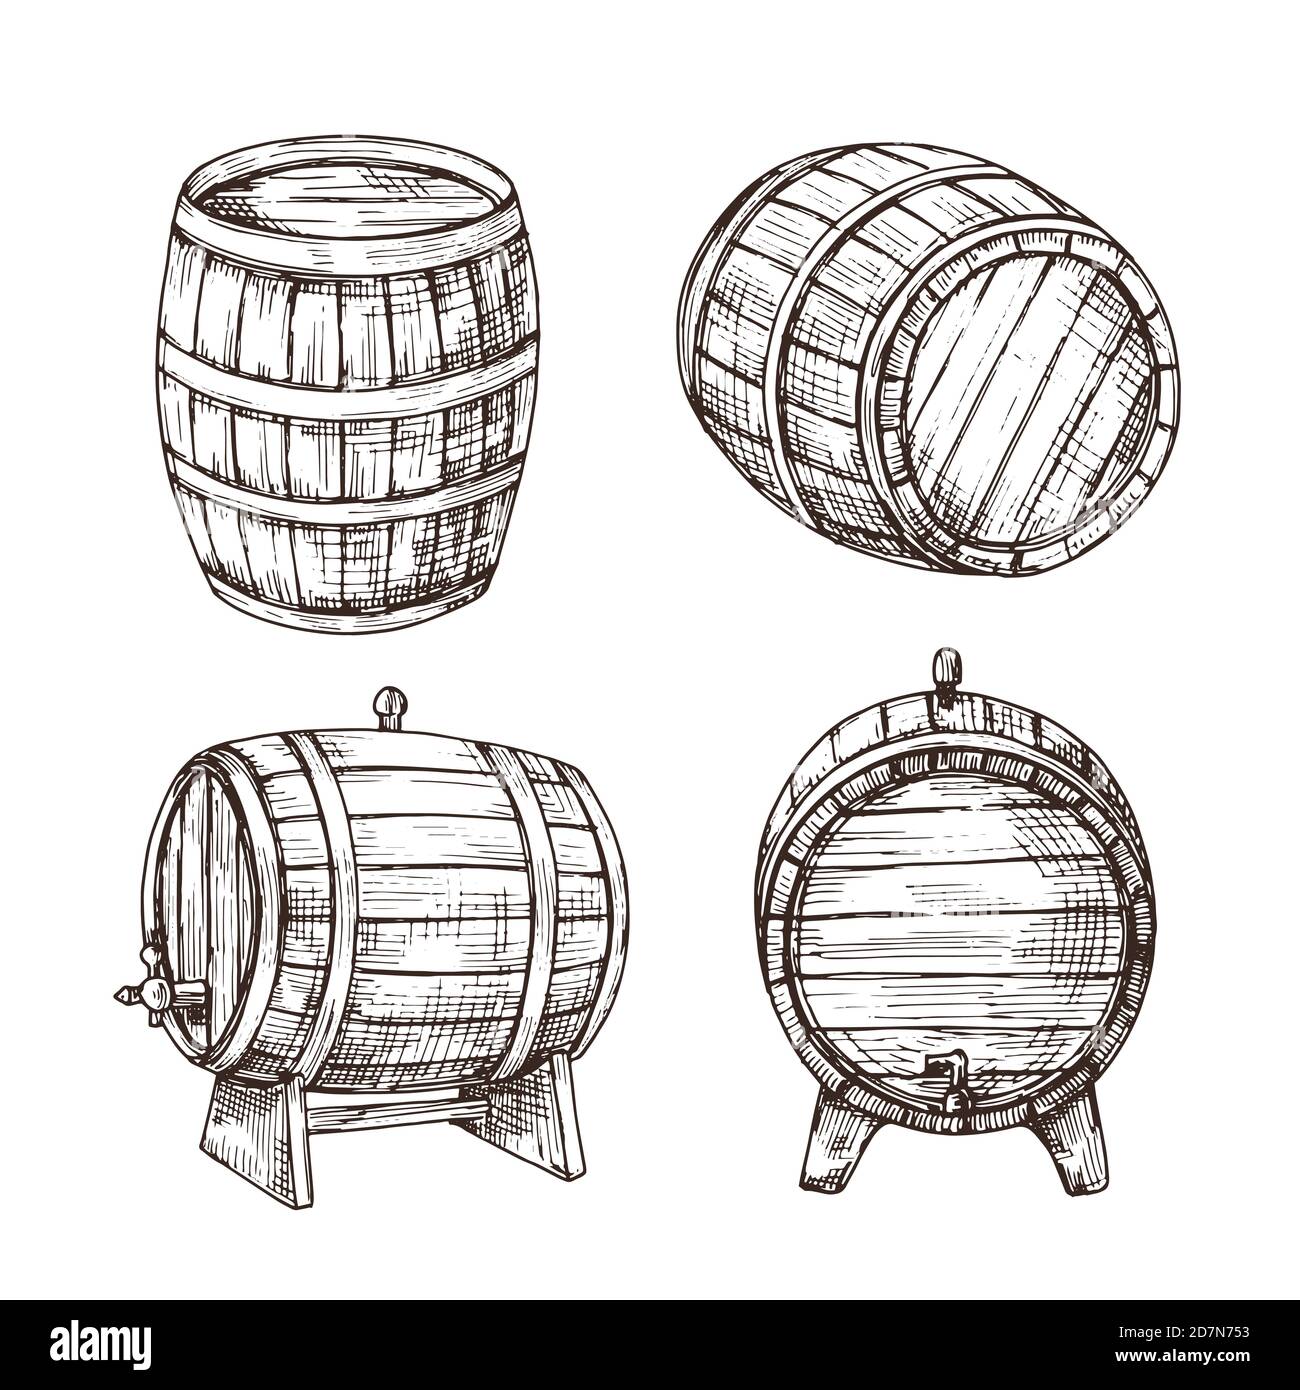 Sketch barrels. Whiskey oak casks. Wooden wine barrel in vintage engraving style. Bar, pub and brewery vector sign isolated. Illustration of cask wood, winery drink and whiskey keg Stock Vector